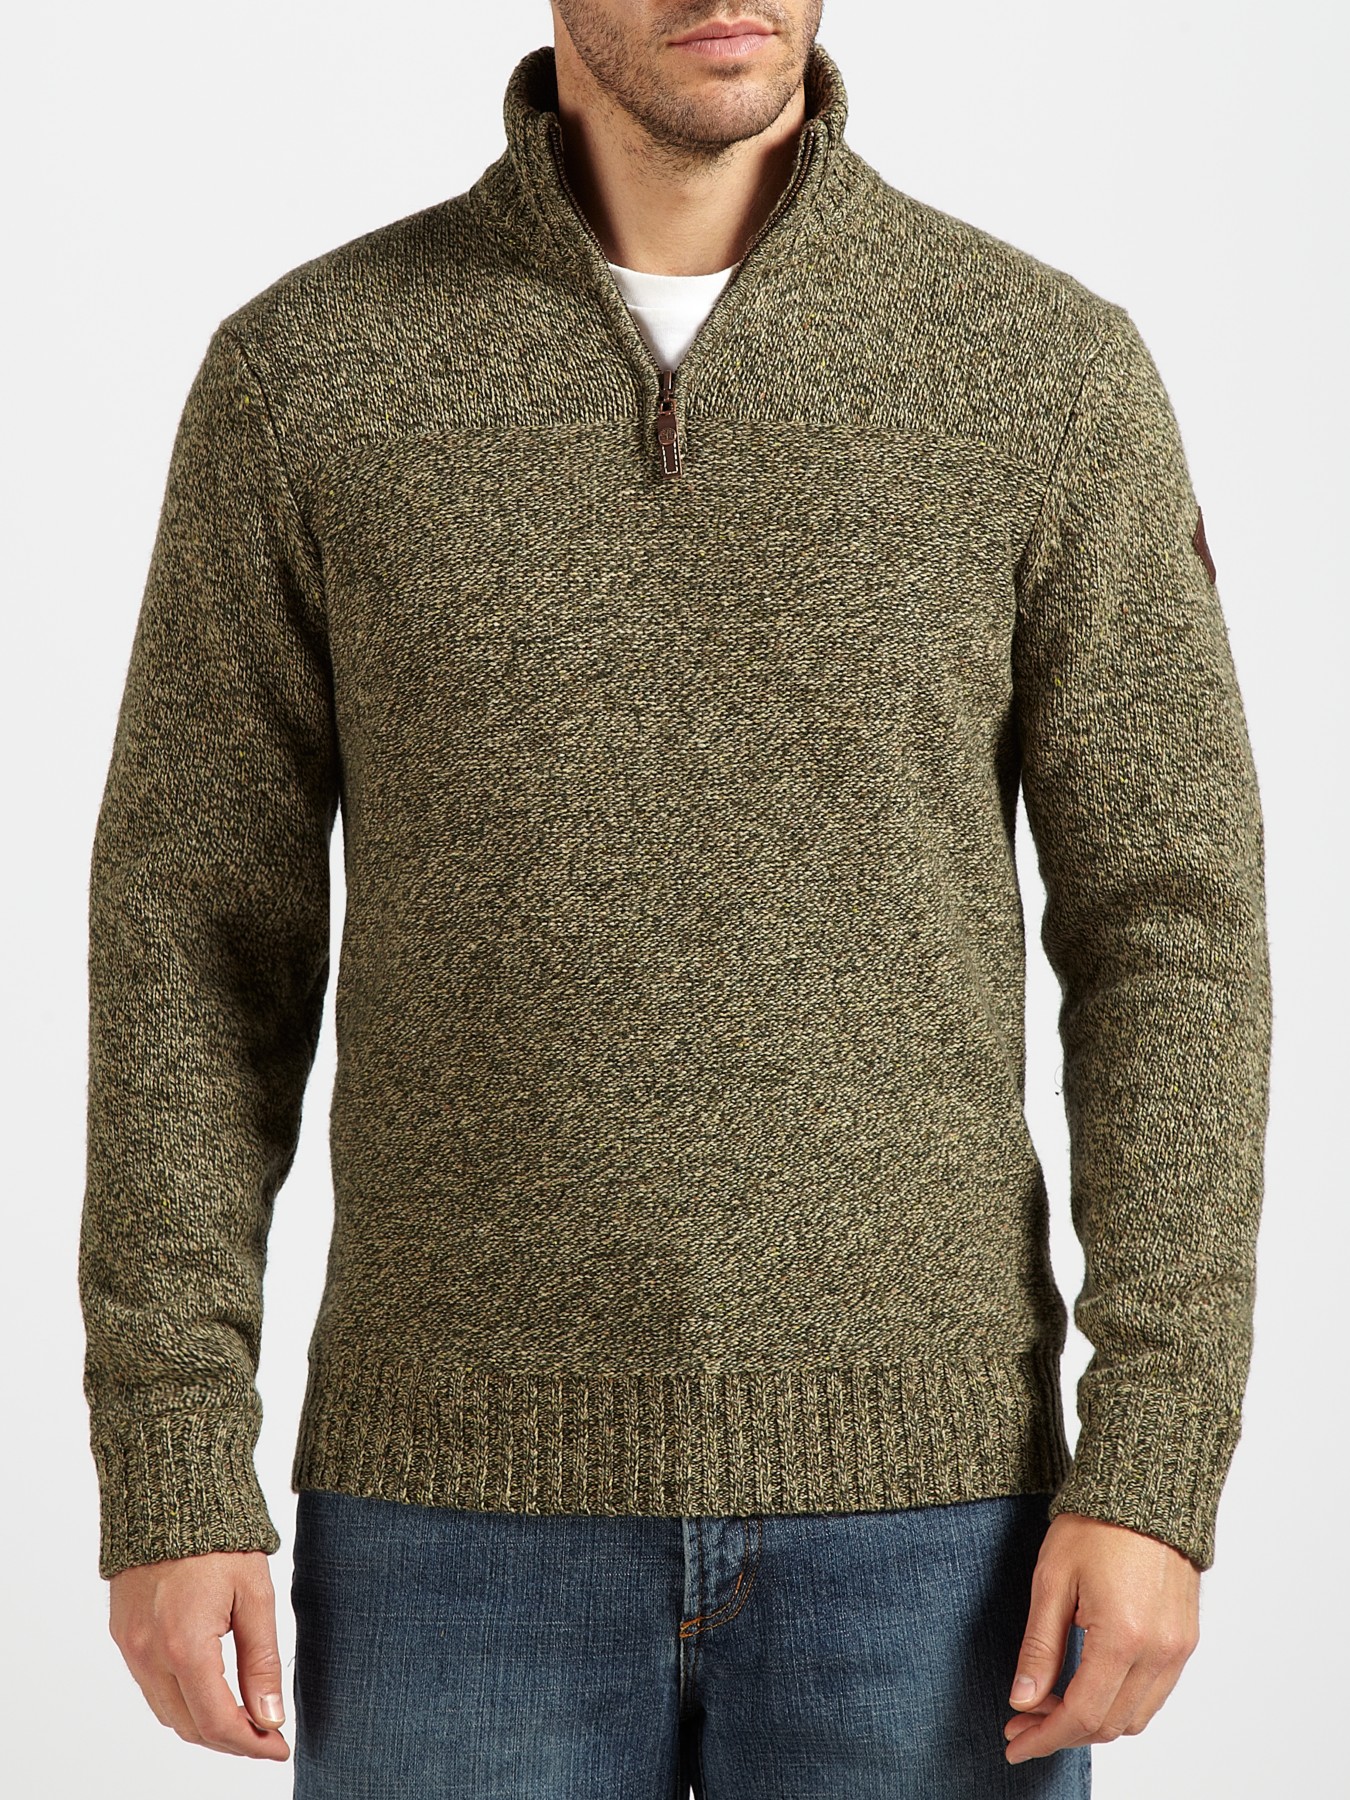 Lyst - Timberland Lambswool Donegal Half Zip Sweater in Brown for Men